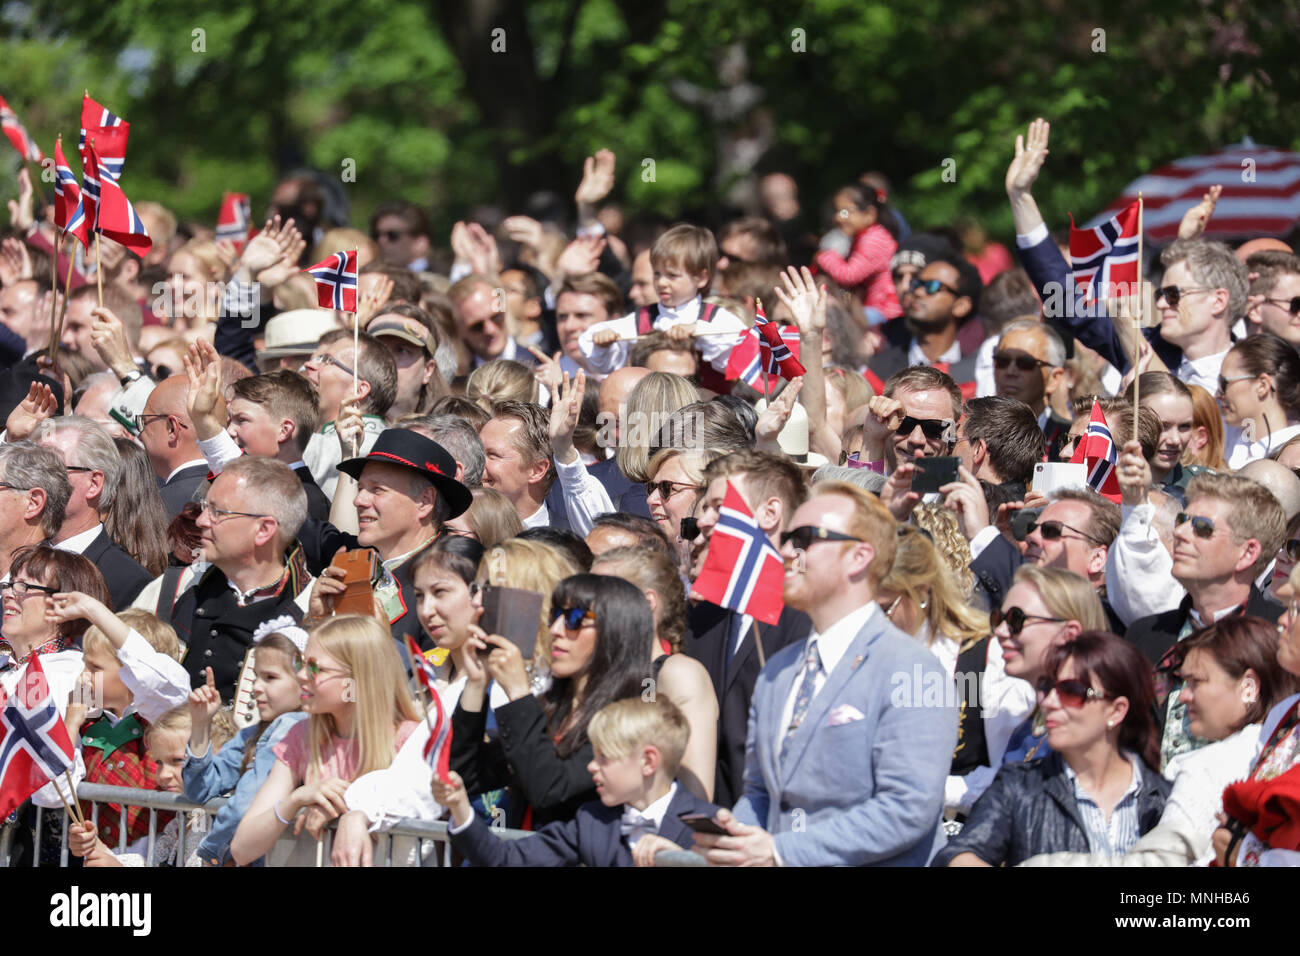 Norway Oslo May 17 18 The Norwegian People Are Waving Their Hands And Greeting The Norwegian Royal Family At Balcony Of The Royal Palace During The Norwegian Constitution Day Also Referred